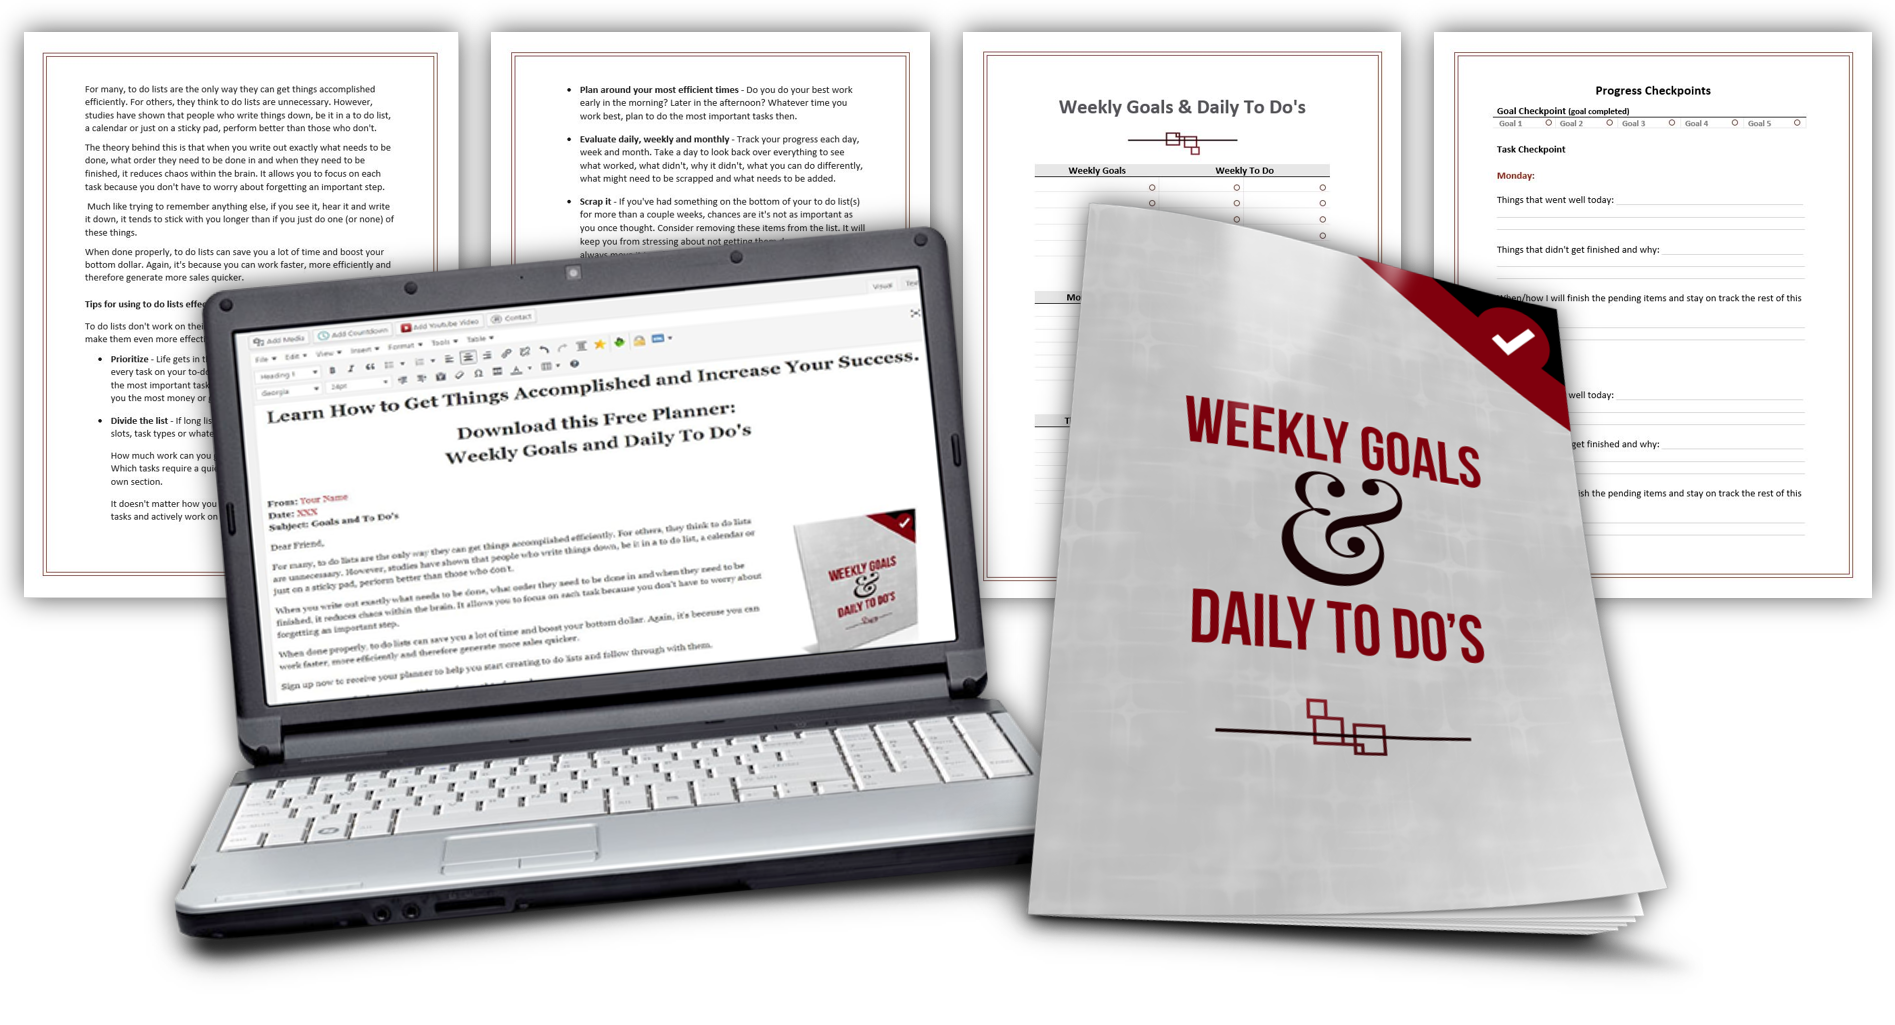 Weekly Goals and Daily To Dos